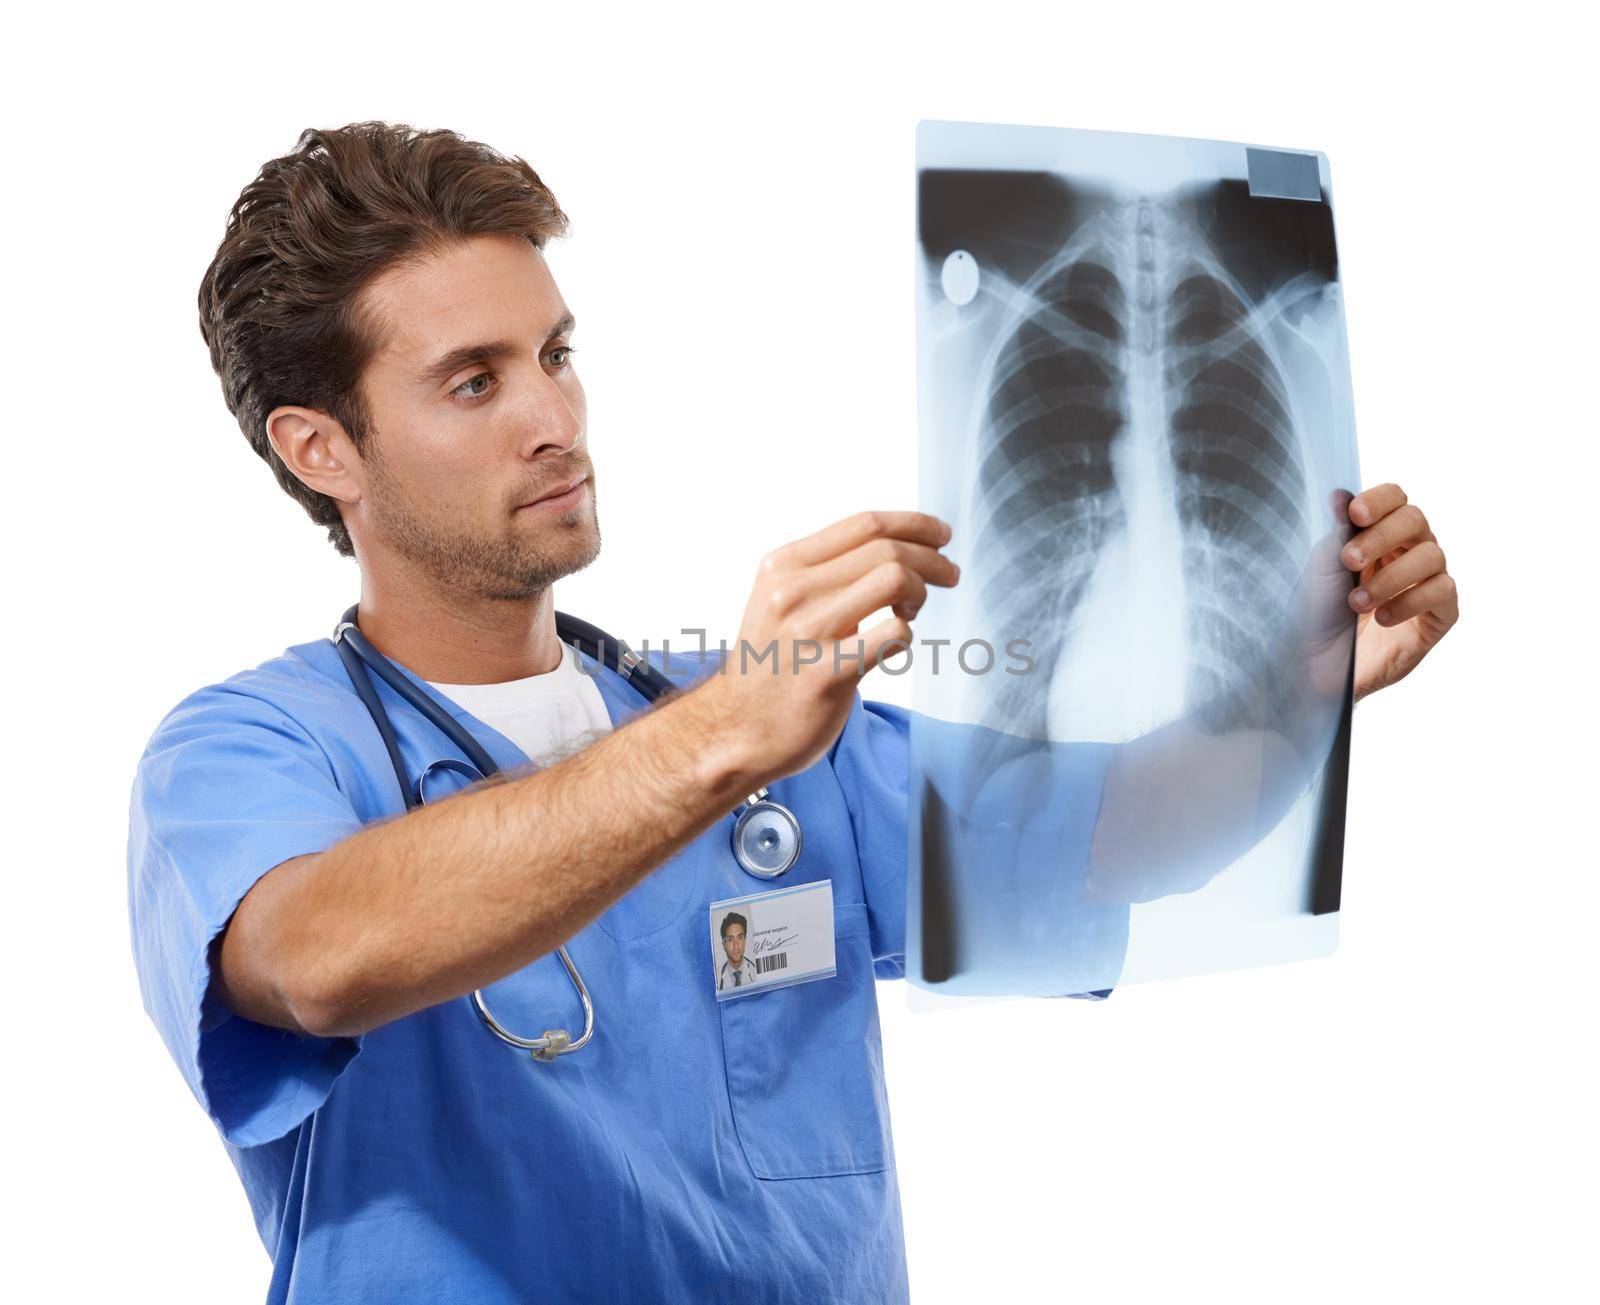 Focusing on finding a treatment. Studio shot of a handsome young doctor examining an x-ray he is holding up